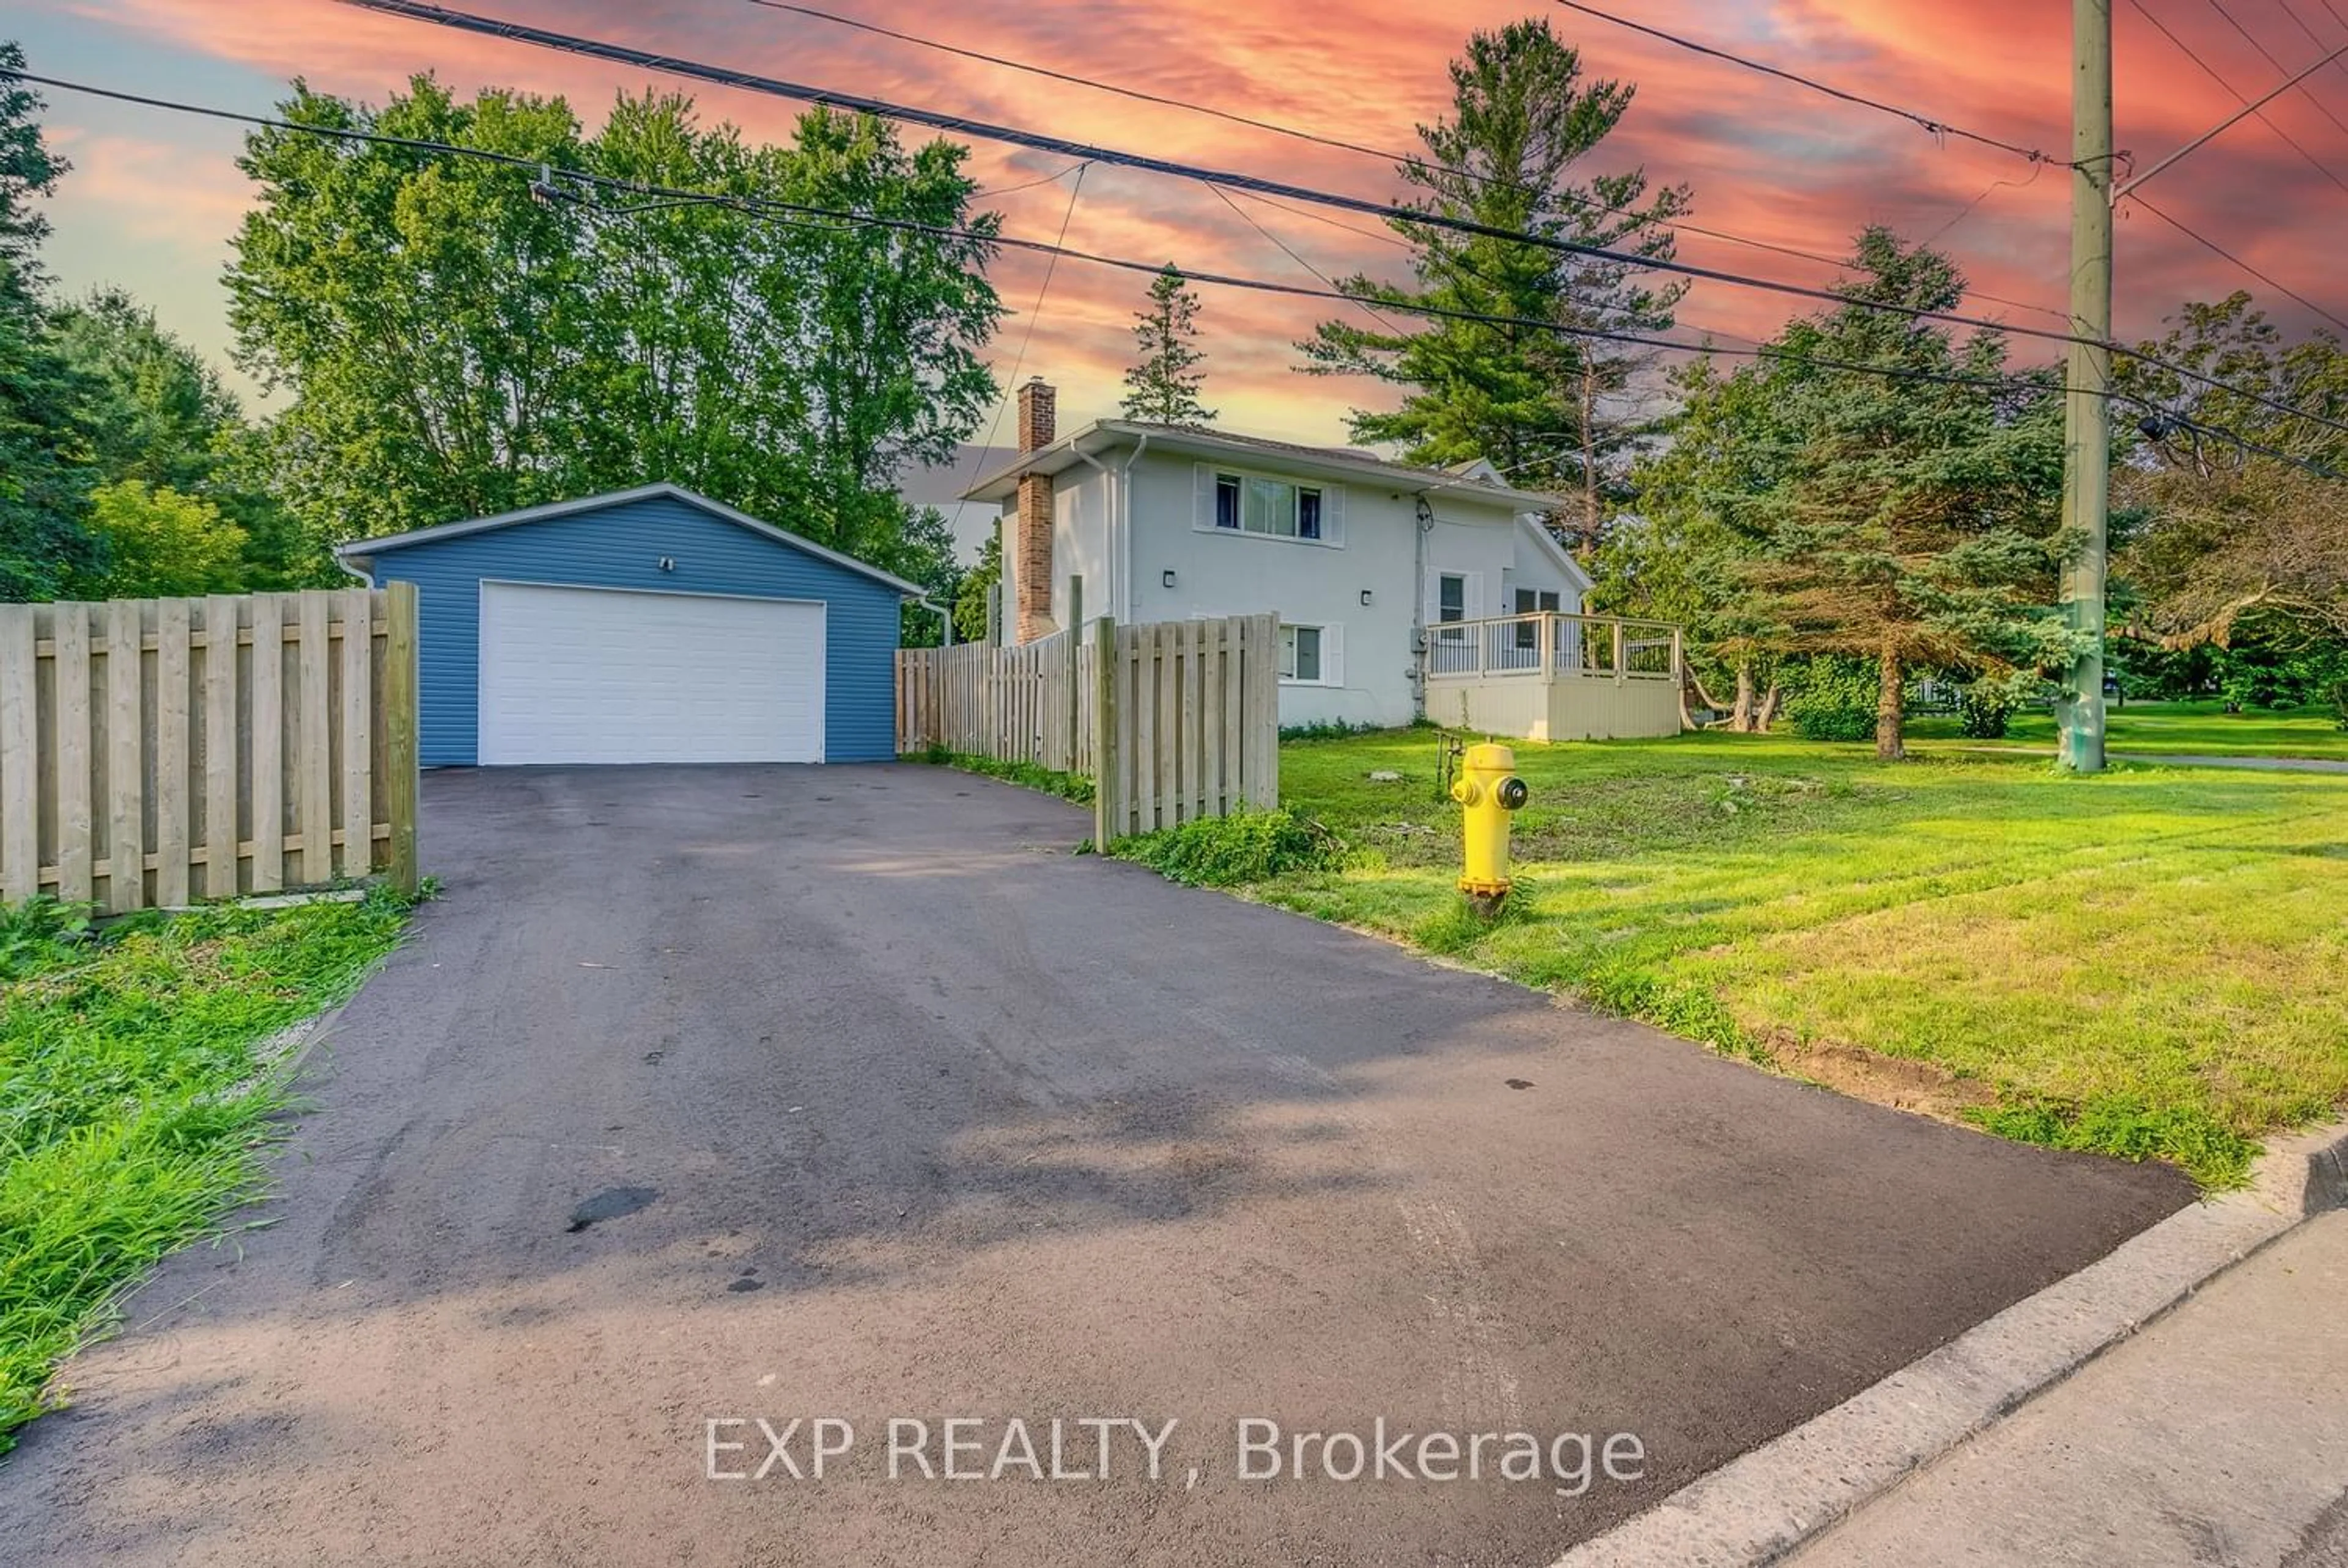 Frontside or backside of a home for 270 Conlin Rd, Oshawa Ontario L1H 7K4